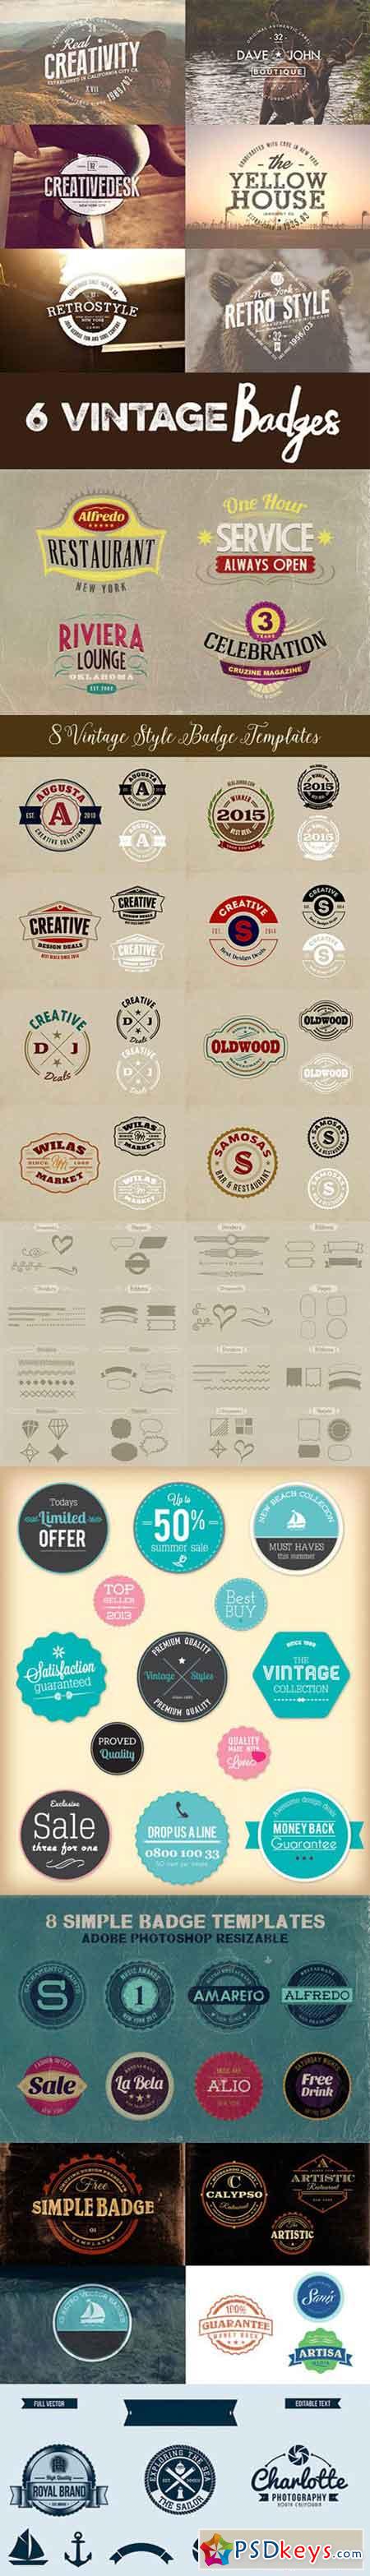 Retro Badges, Signs, Logos and Elements Templates Pack